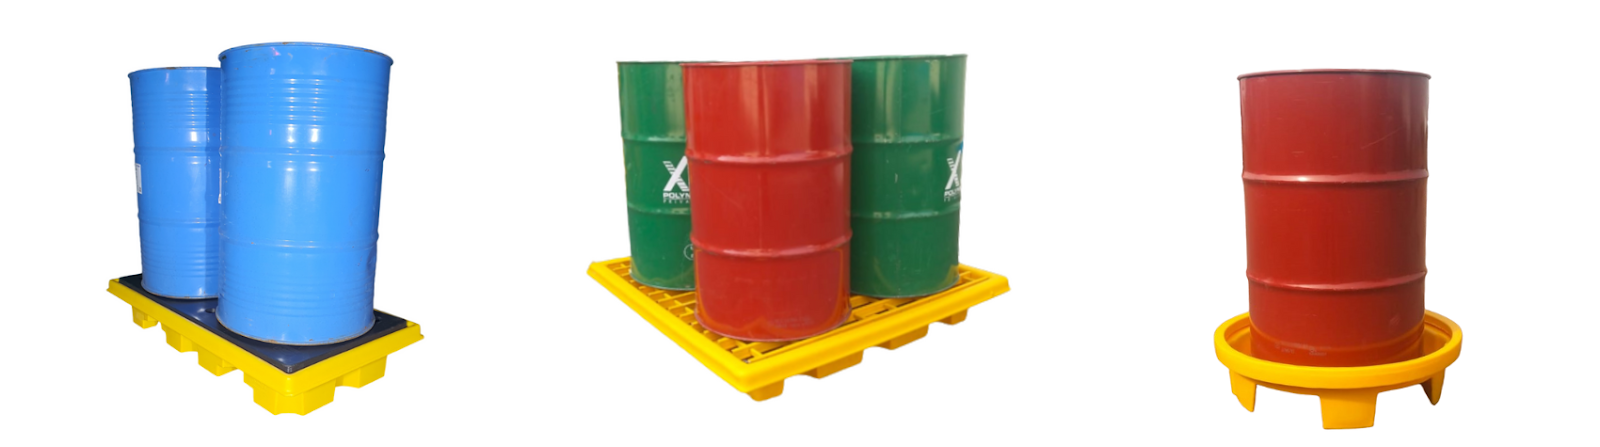 Swift's Single Wall Drum Spill Containment Pallets 